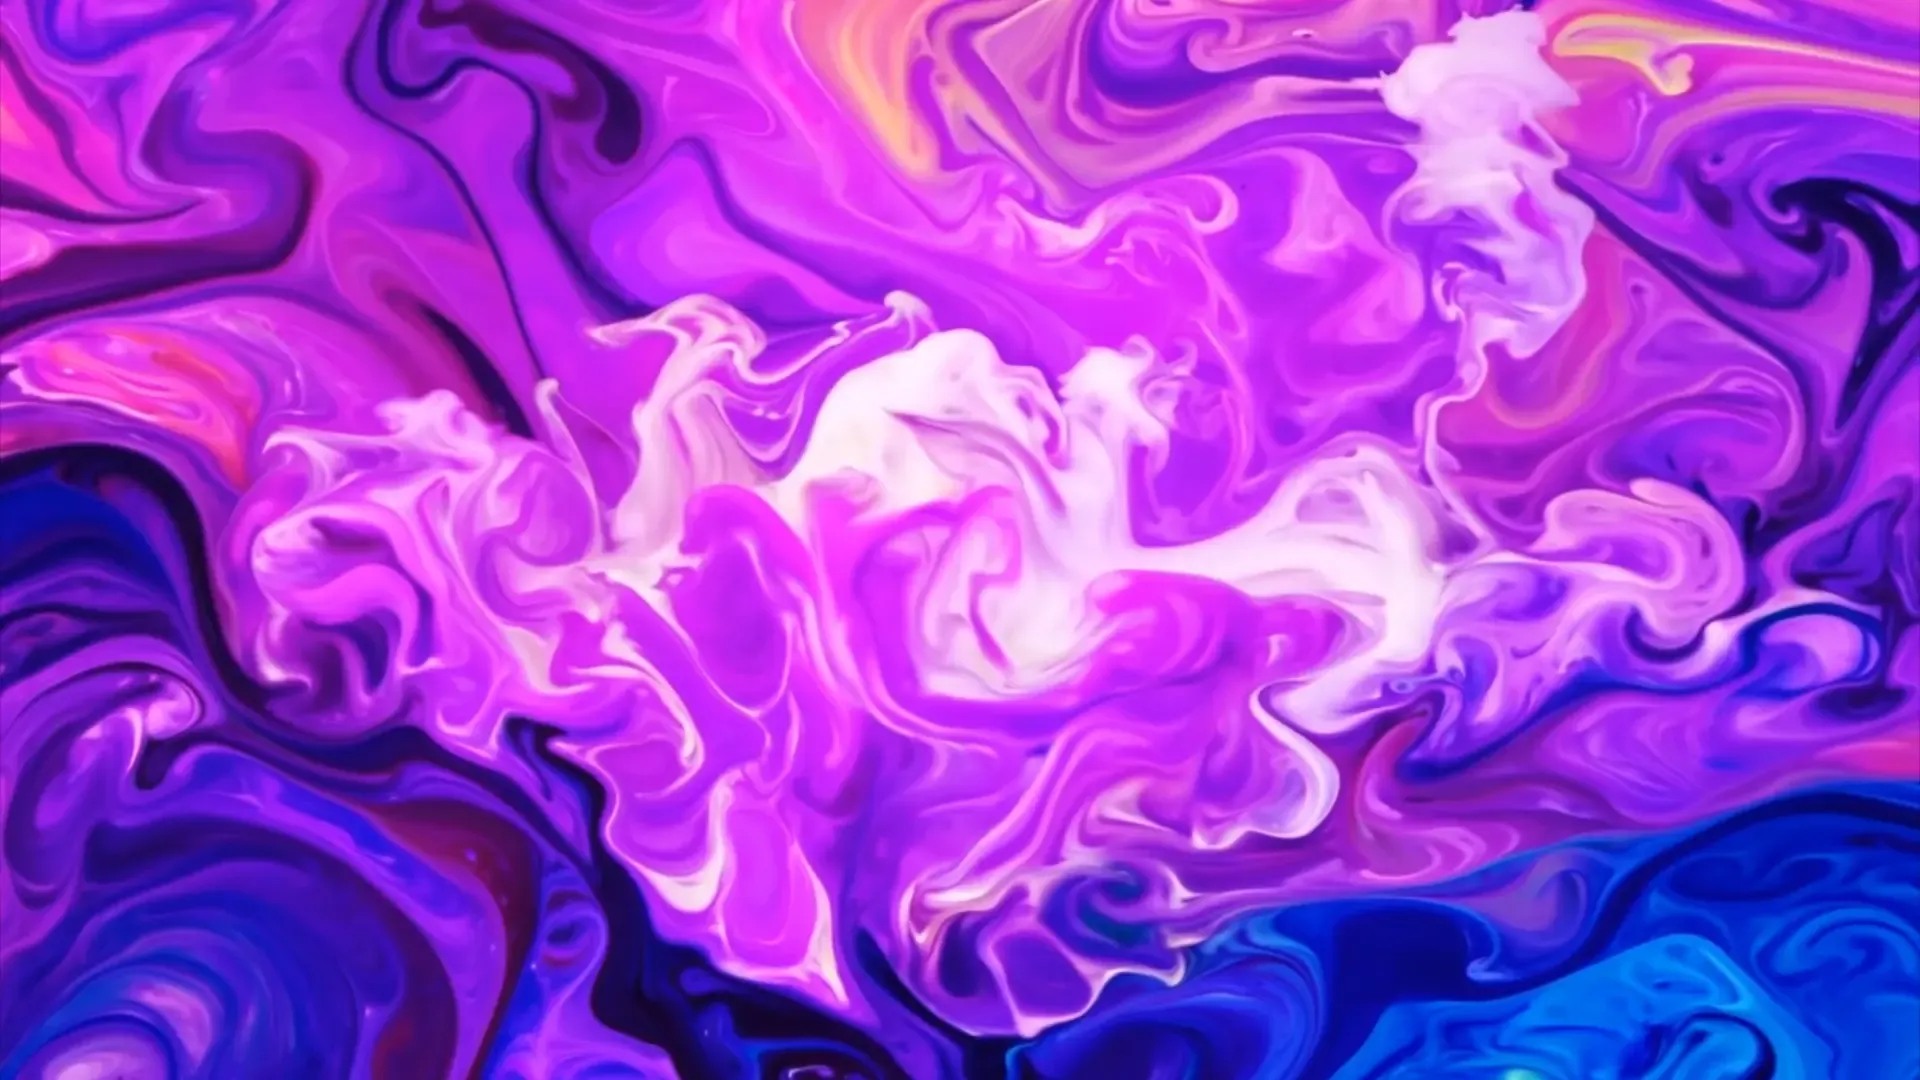 Vibrant Swirls Title Animation Background with Colorful Whirl